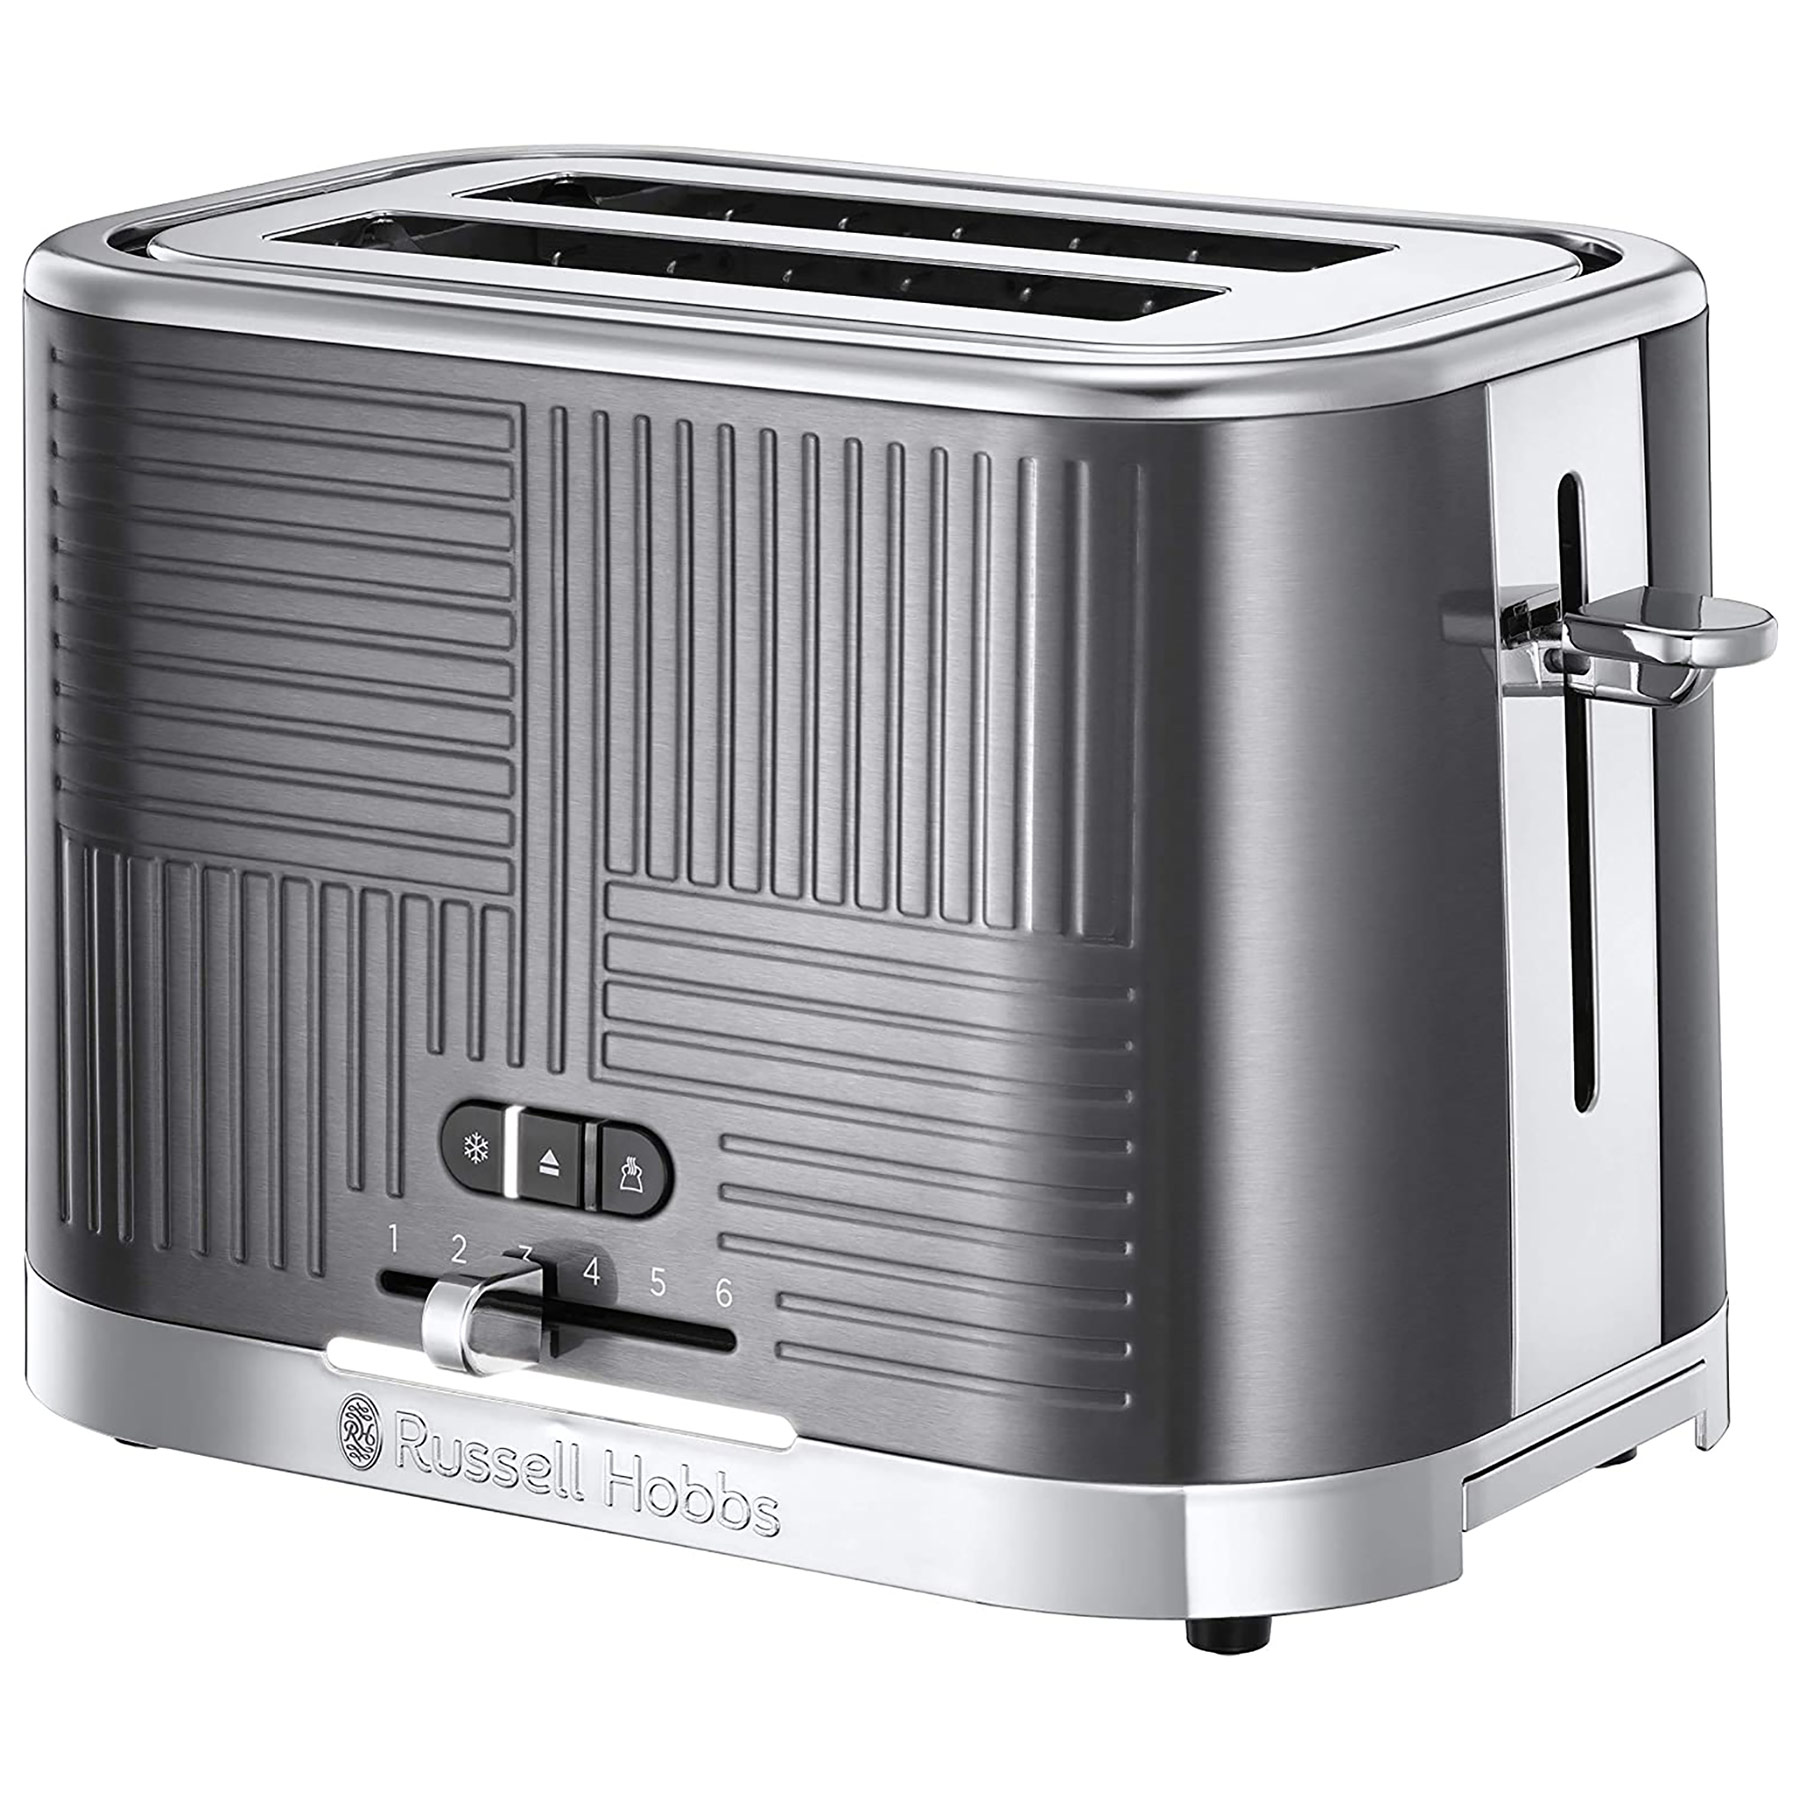 Image of Russell Hobbs 25250 Geo 2 Slice Toaster in Textured Grey Stainless Ste